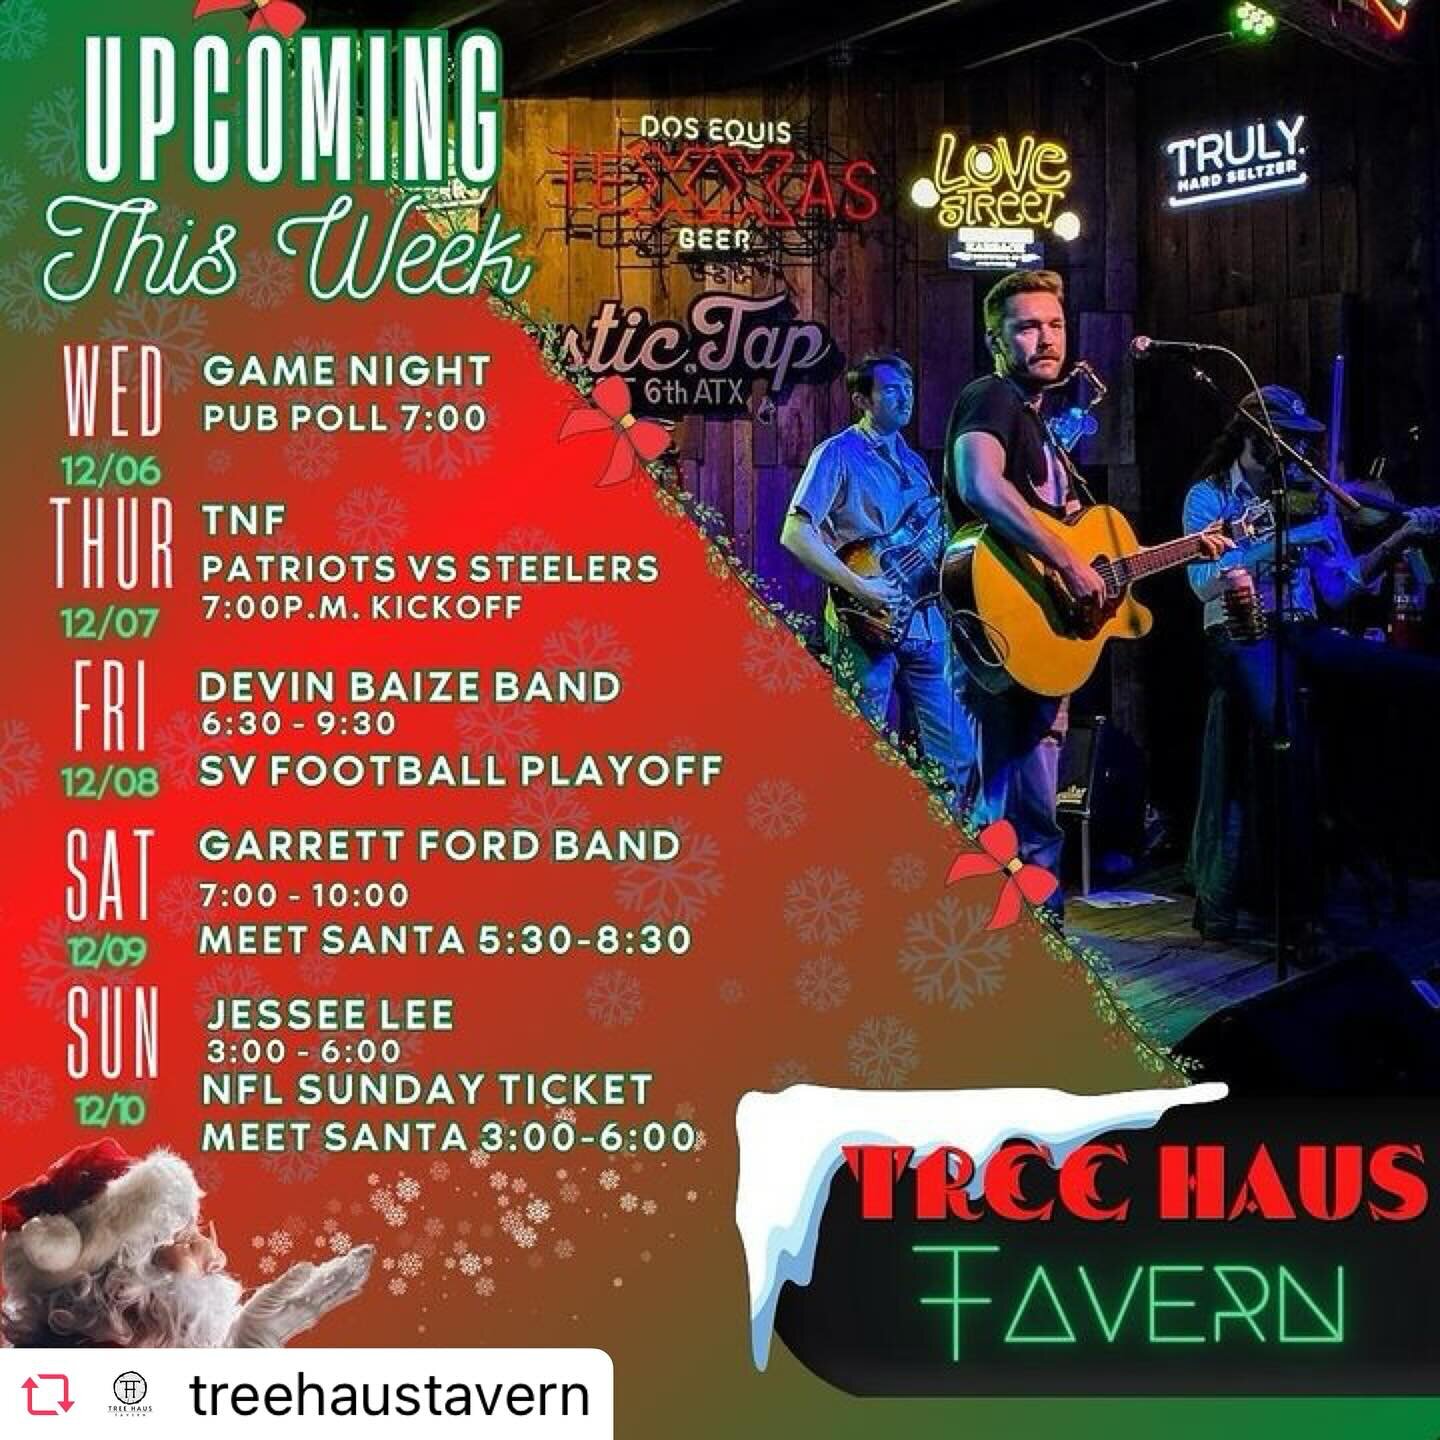 @treehaustavern &ldquo;Join us at Tree Haus Tavern this week for a winning lineup of events! 🍻 

🎲 Game Night on Wednesday
🏈 NFL Football on Thursday and Sunday
🎶 Live Music on Friday, Saturday, and Sunday

Bring the whole family because Santa is